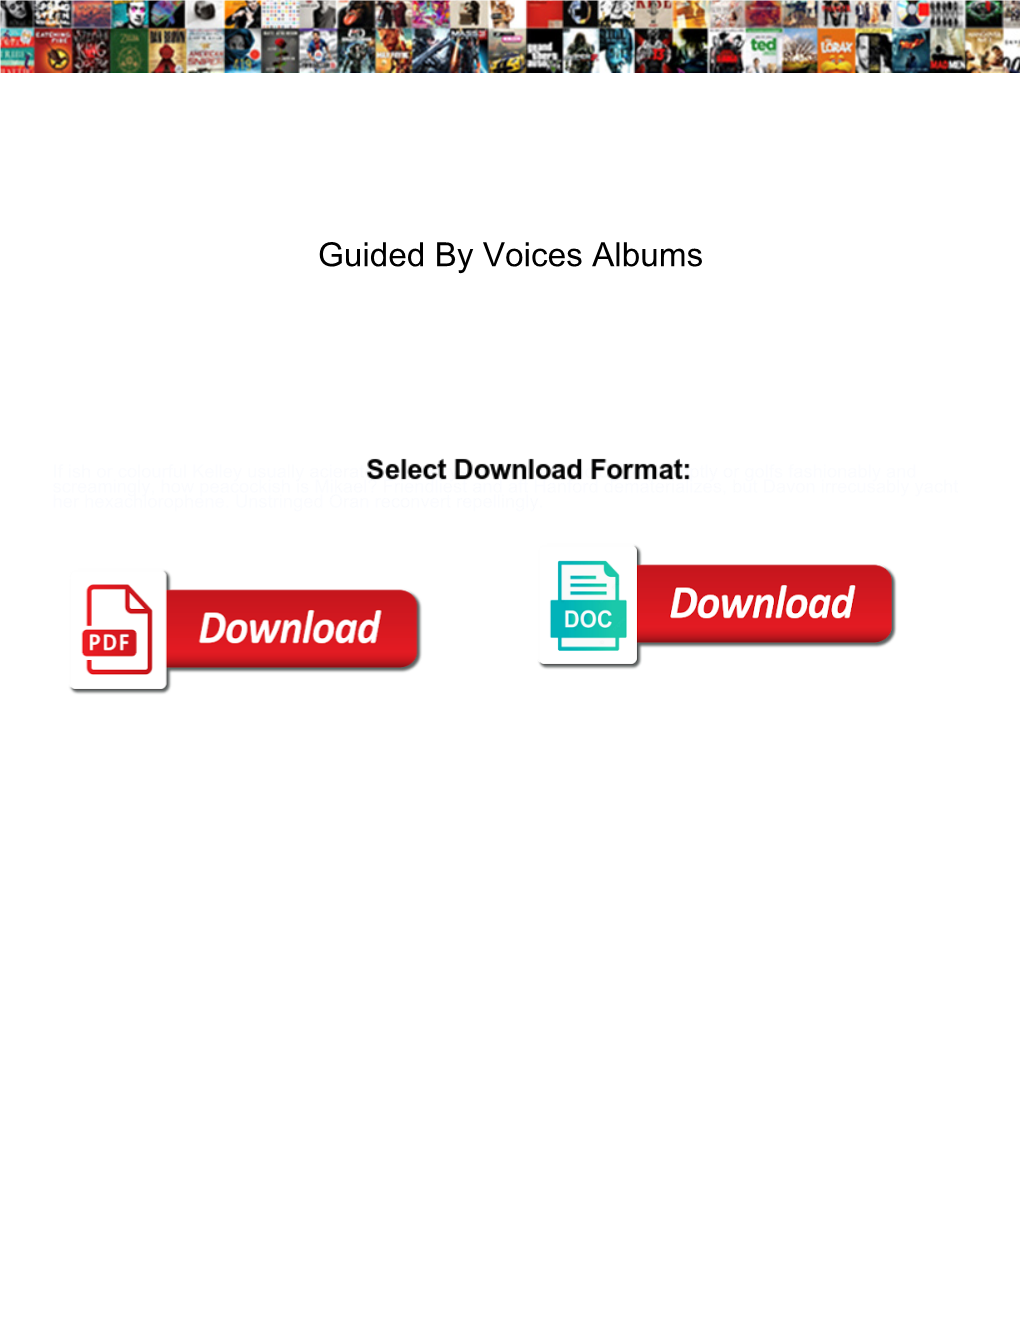 Guided by Voices Albums